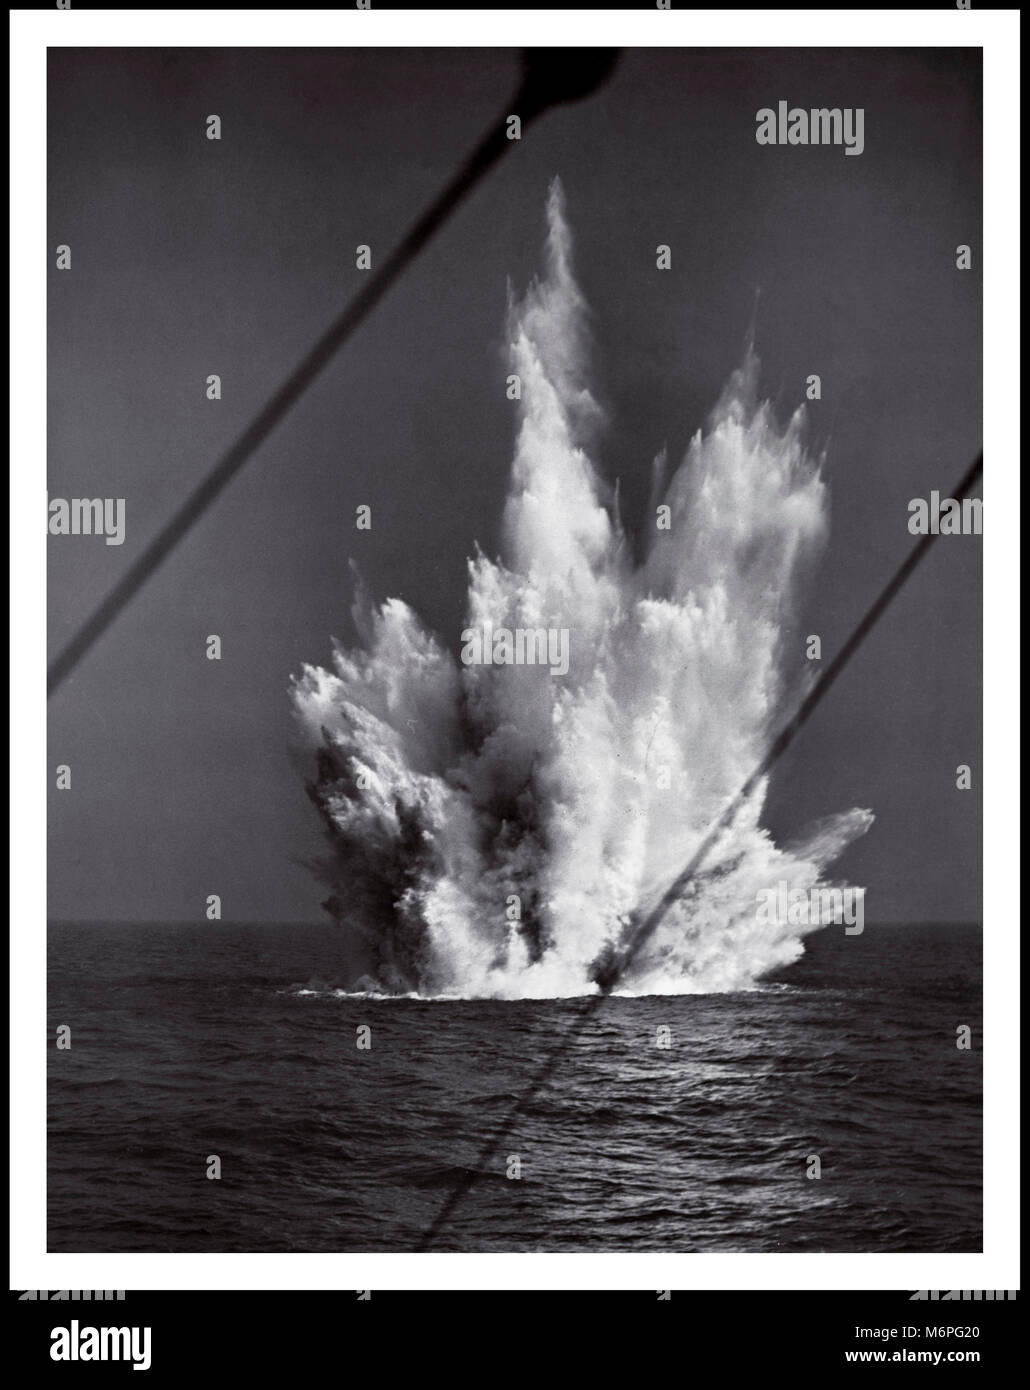 WW2 Depth Charge exploding in the hunt for German U-Boats in Battle of the Atlantic. 1940’s The Germans lost 783 U-boats and 30,000 sailors, while the Italians lost 500 sailors and 17 submarines. The outcome of the battle was a strategic victory for the Allies. Stock Photo